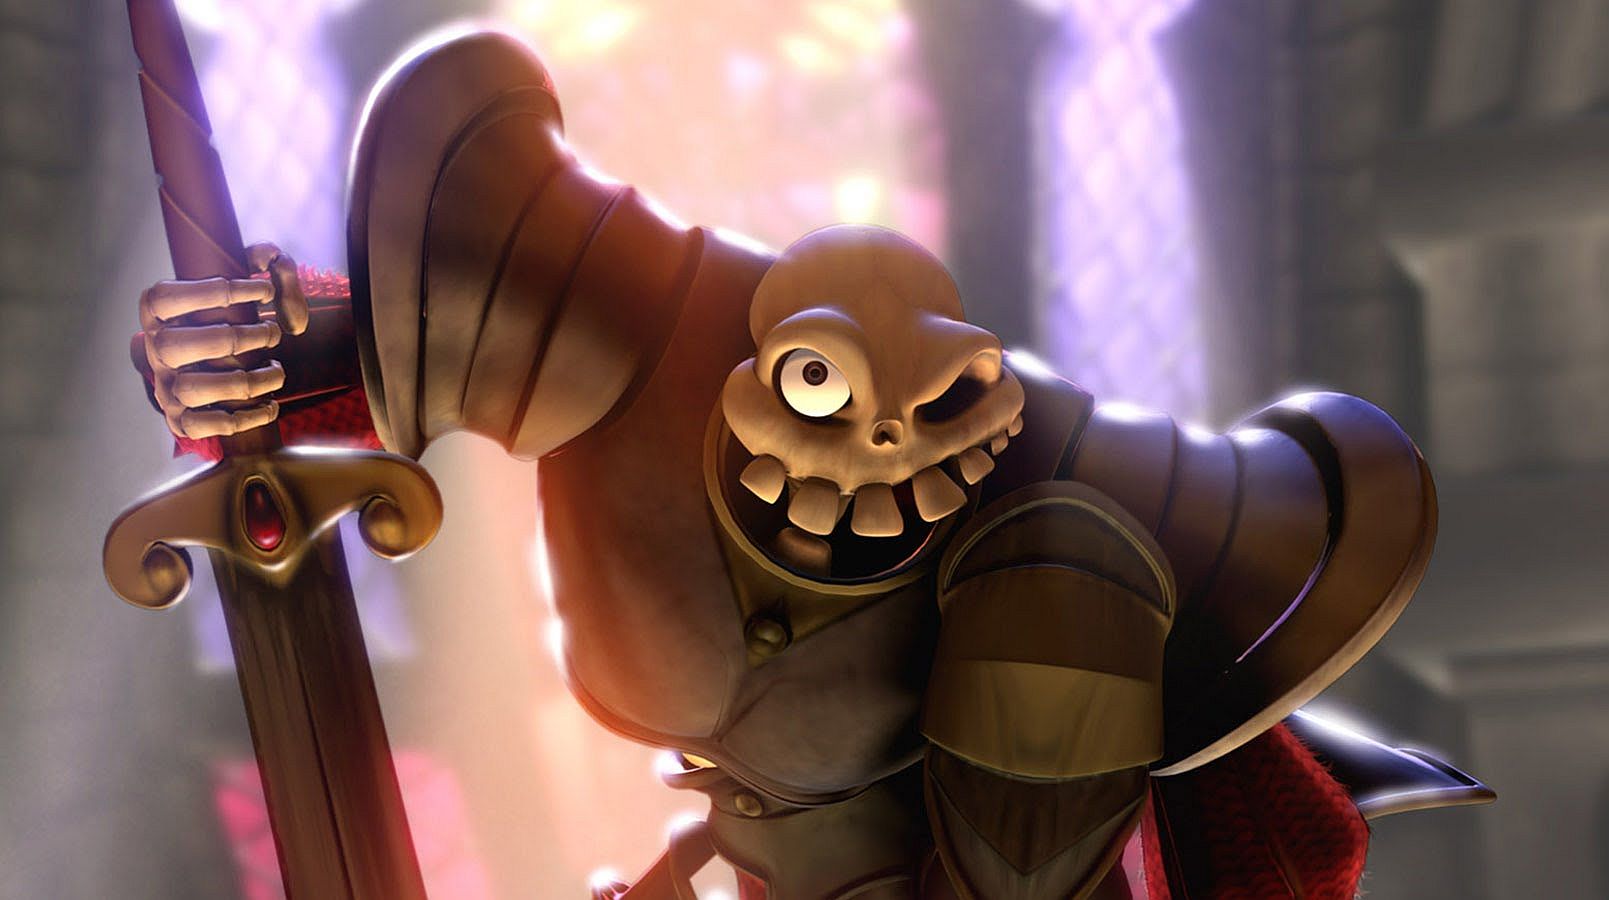 Image for State of Play returns this week with a look at MediEvil, unannounced game